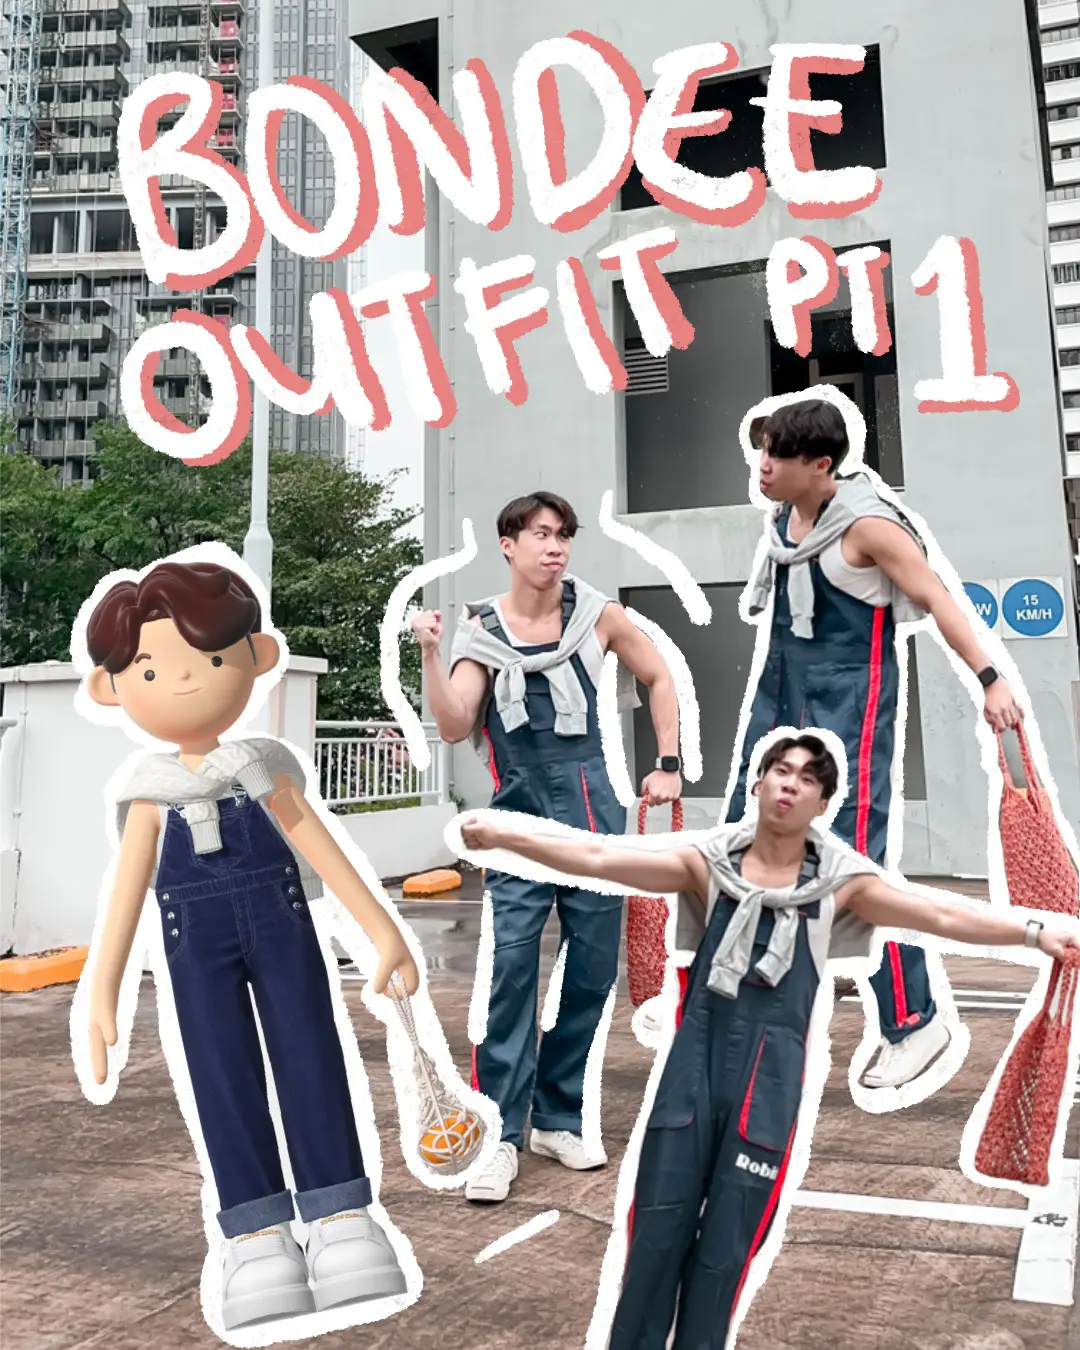 Dressing up like my BONDEE character part 1 👕🥴's images(0)